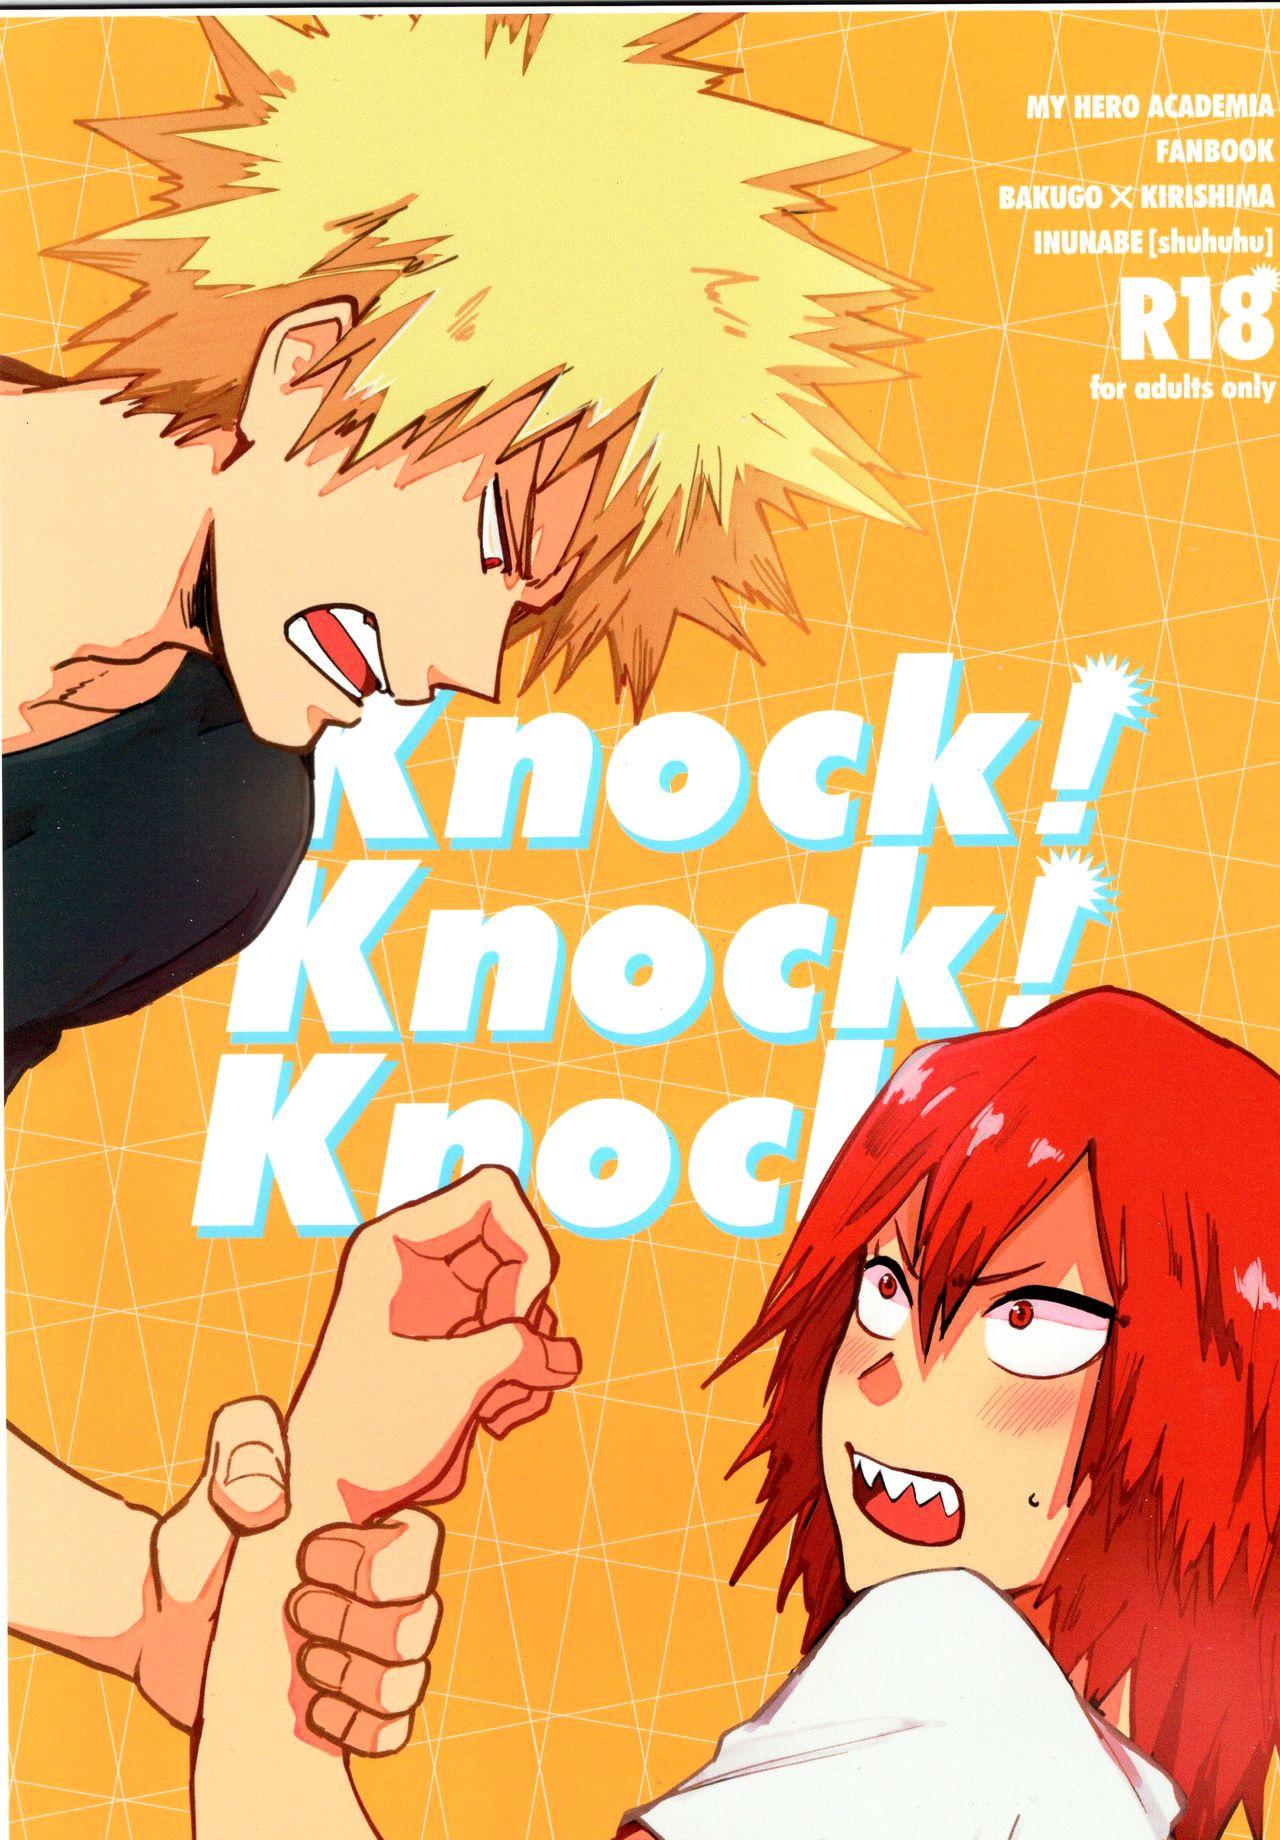 Big Tits Knock! Knock! Knock! - My hero academia Girls Getting Fucked - Picture 1